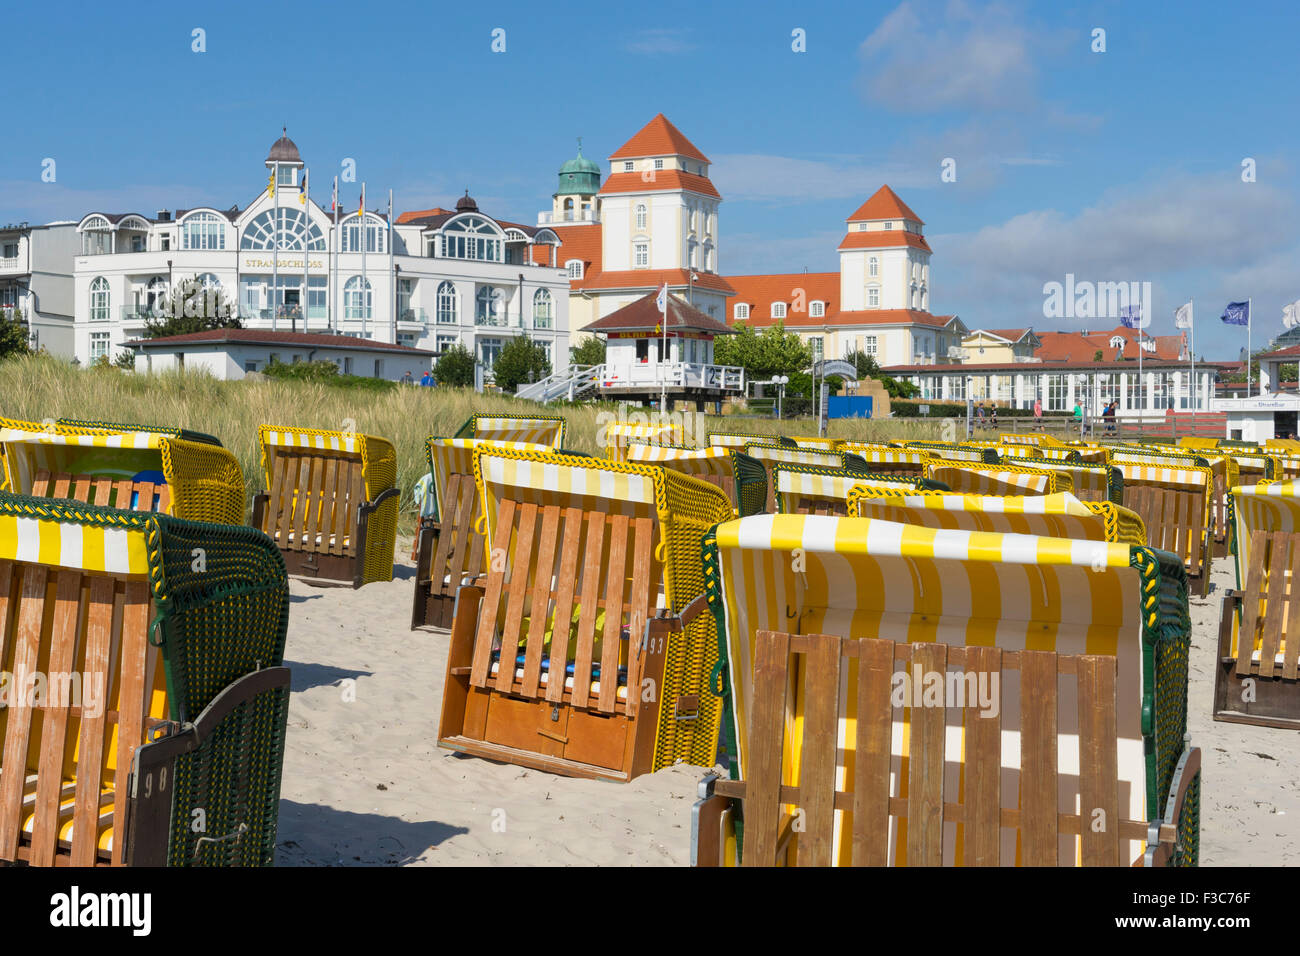 View of traditional Strandkorb seats on beach at Binz seaside resort on Rugen Island in Germany Stock Photo